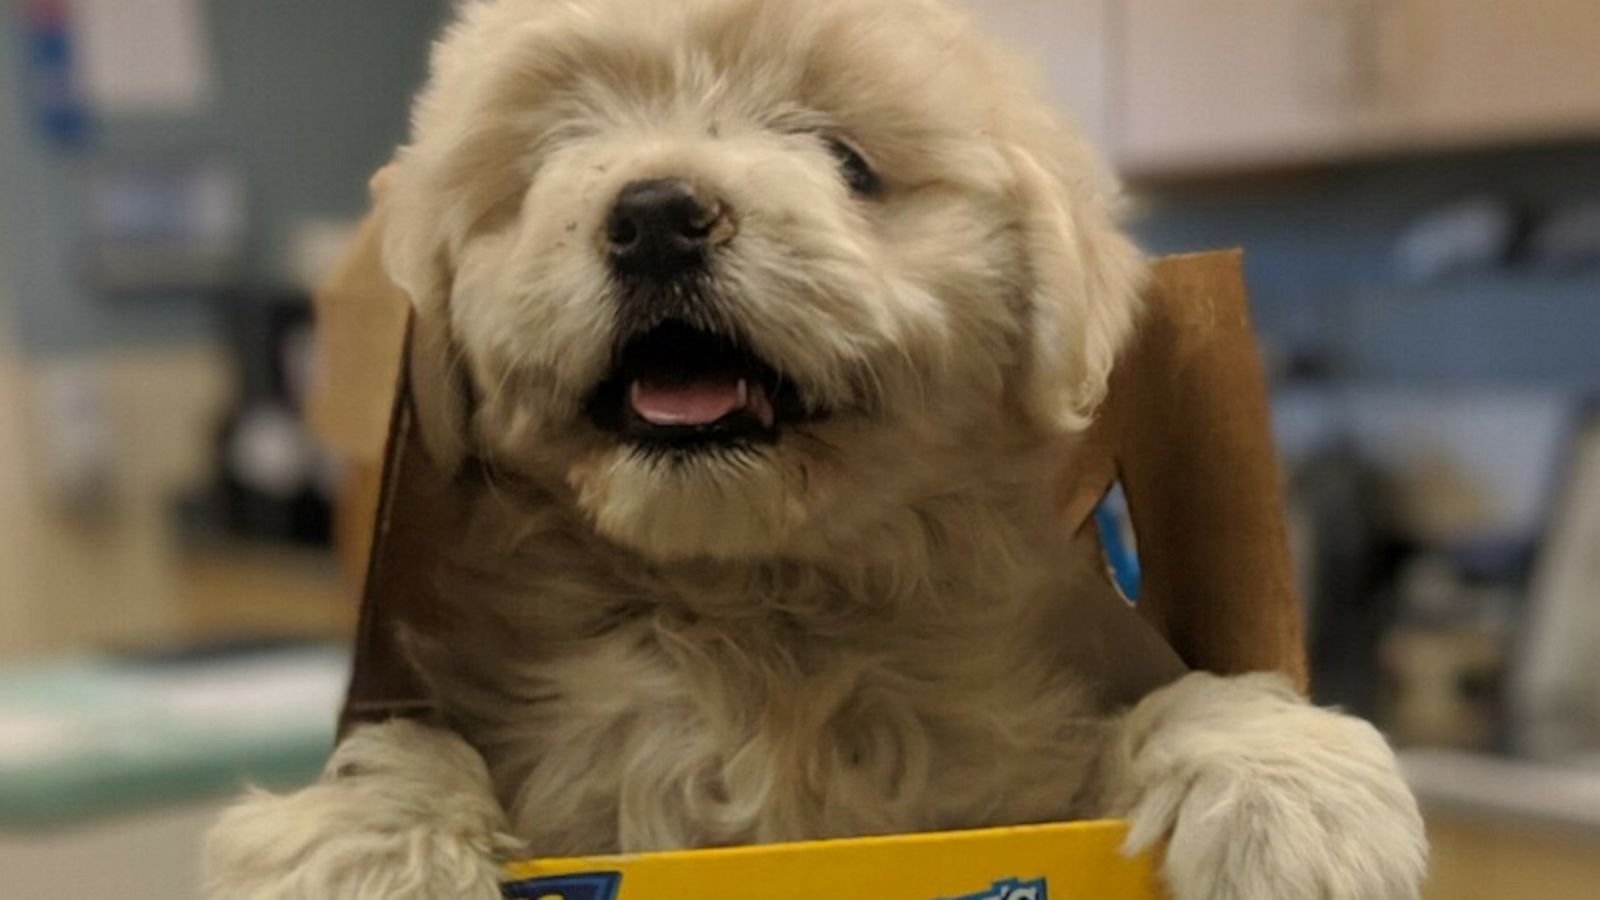 VIDEO: Pup named 'Razz Berry' dropped at shelter in cereal box finds forever home